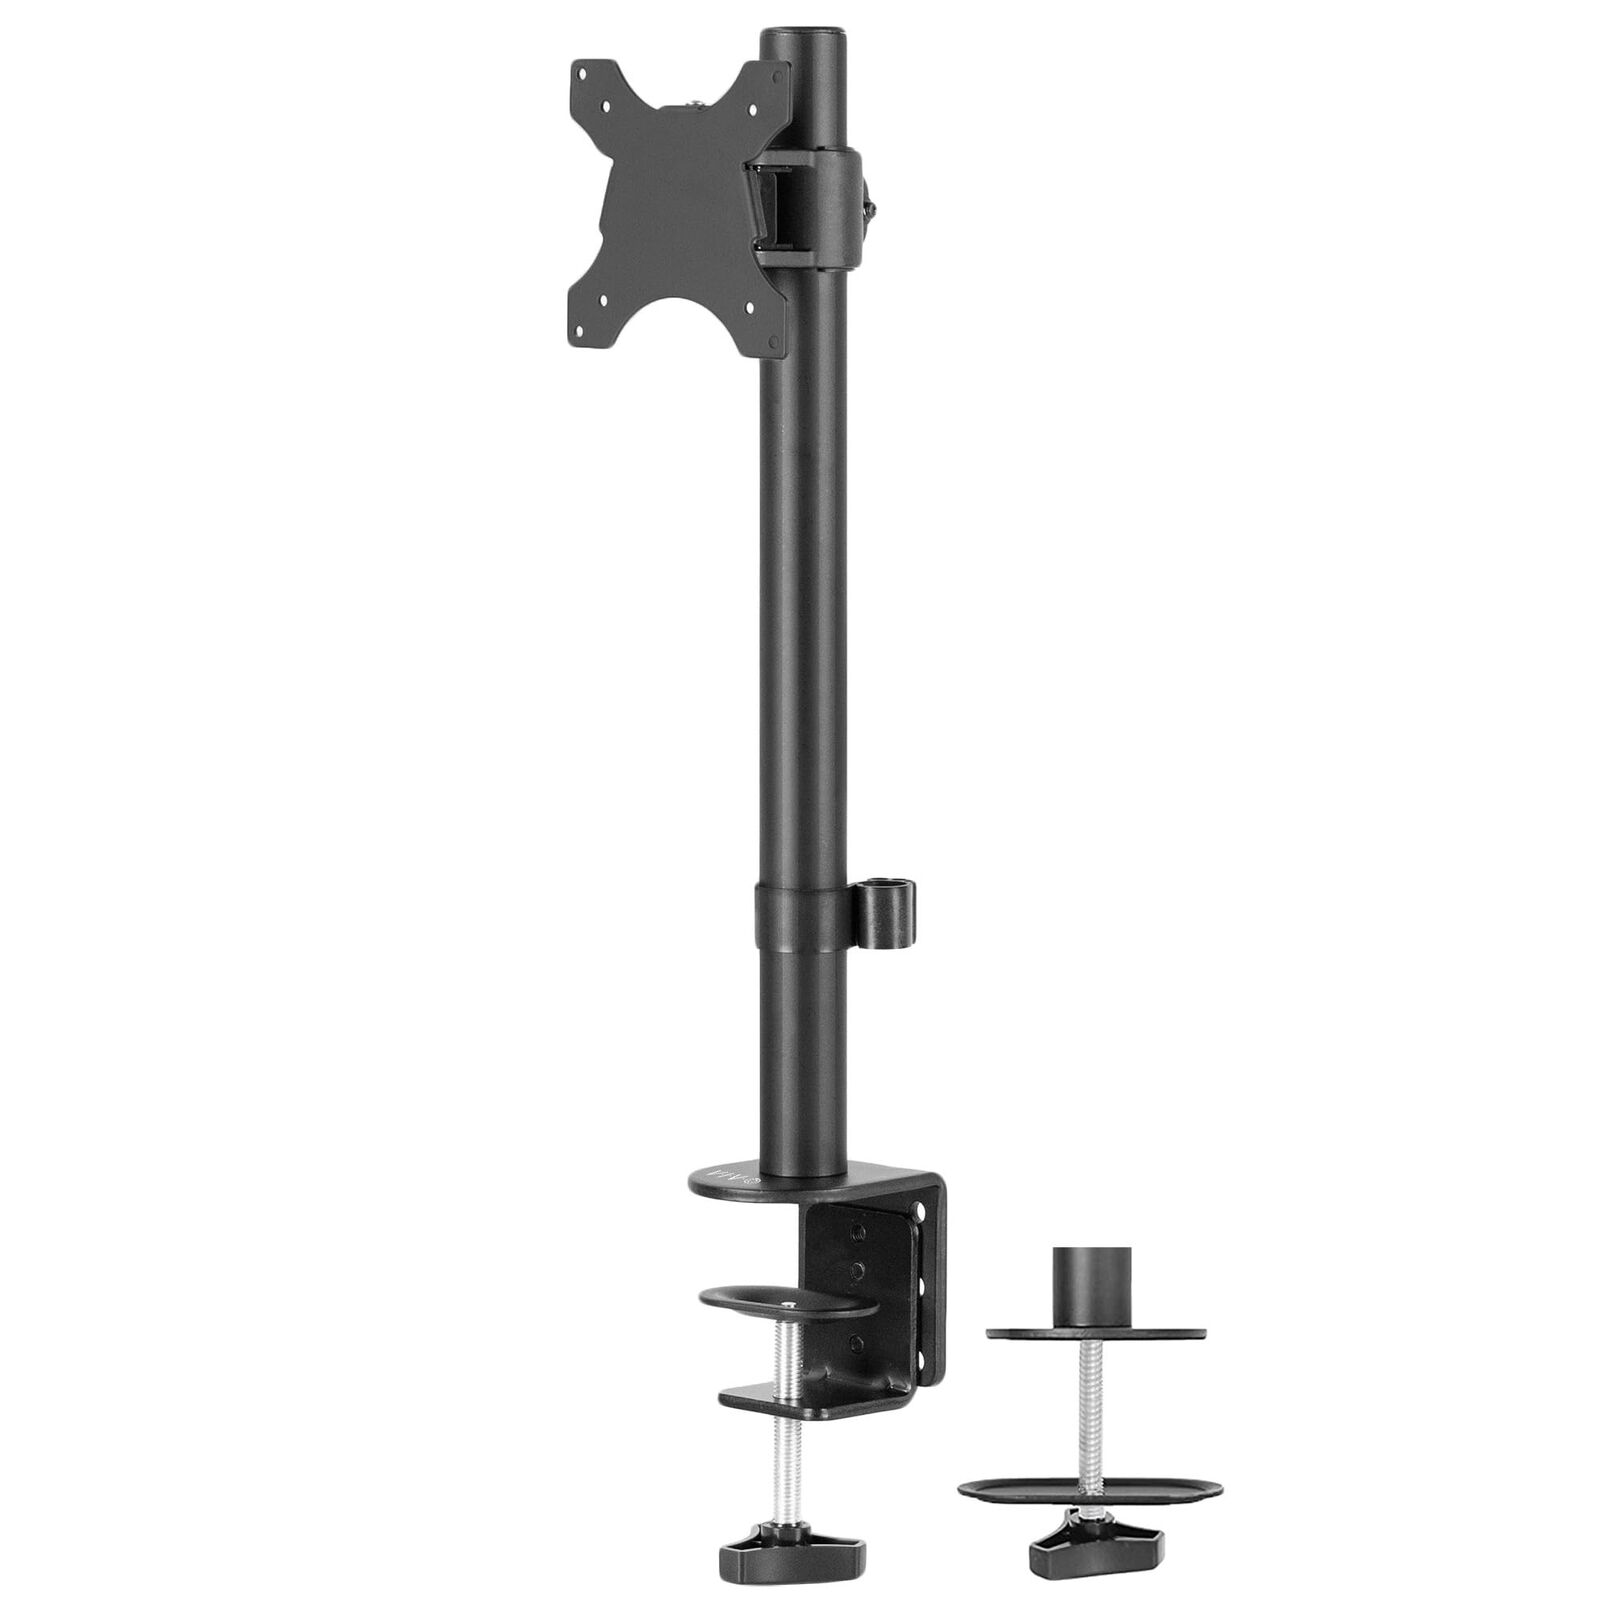 VIVO Single Ultrawide Monitor Fully Adjustable Desk Mount Stand for 1 LED LCD...